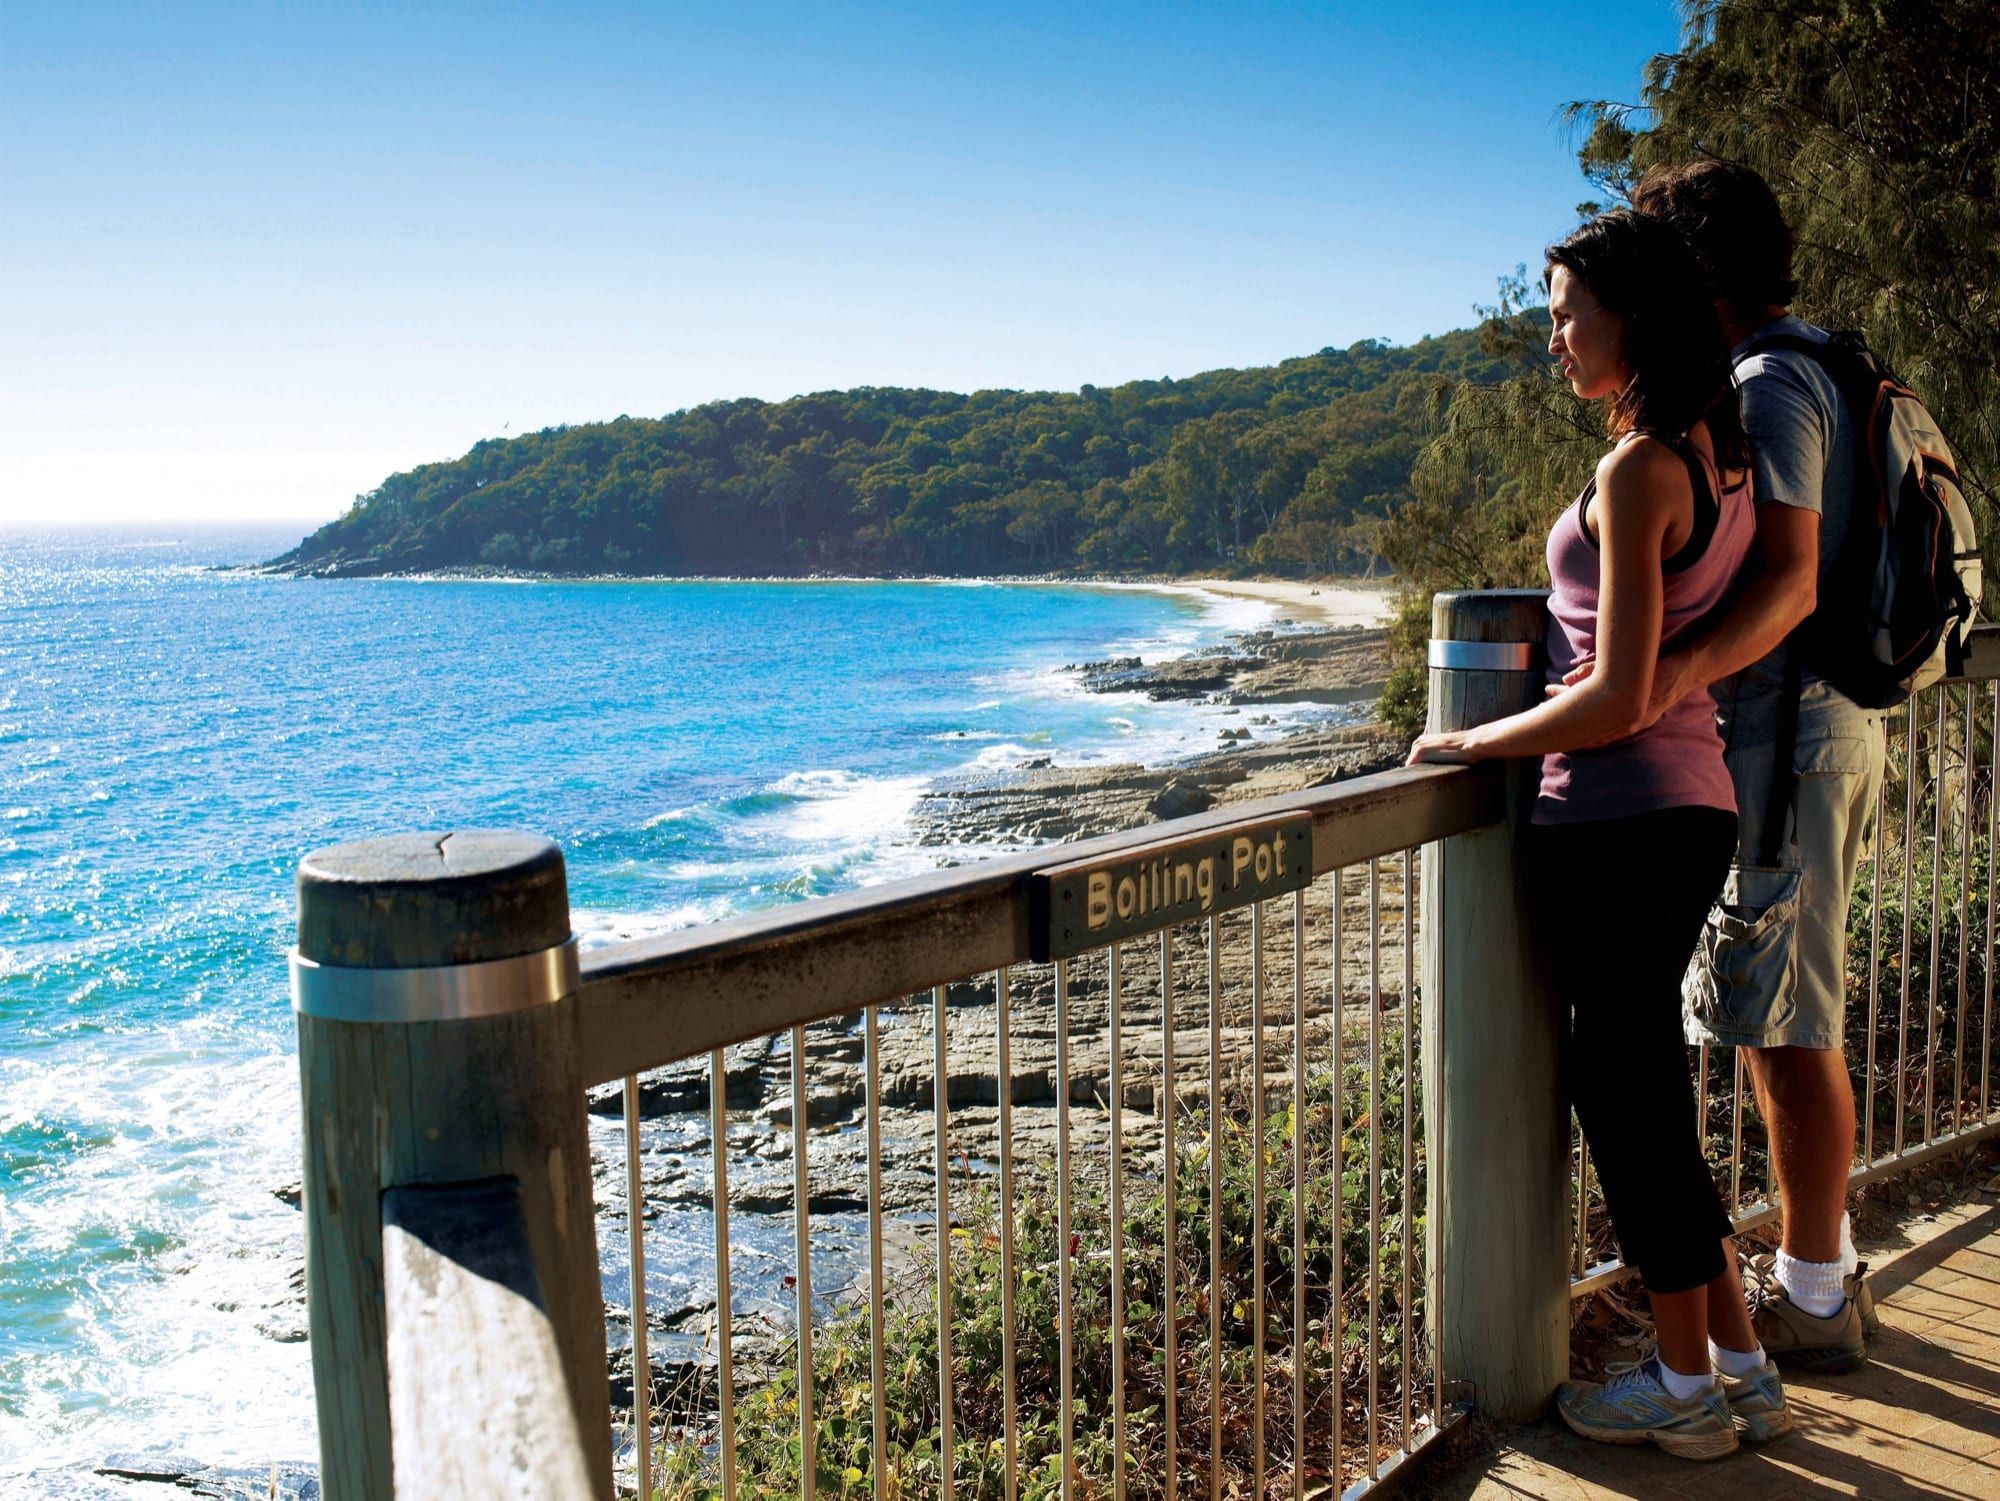 "The best accommodation in Noosa. 